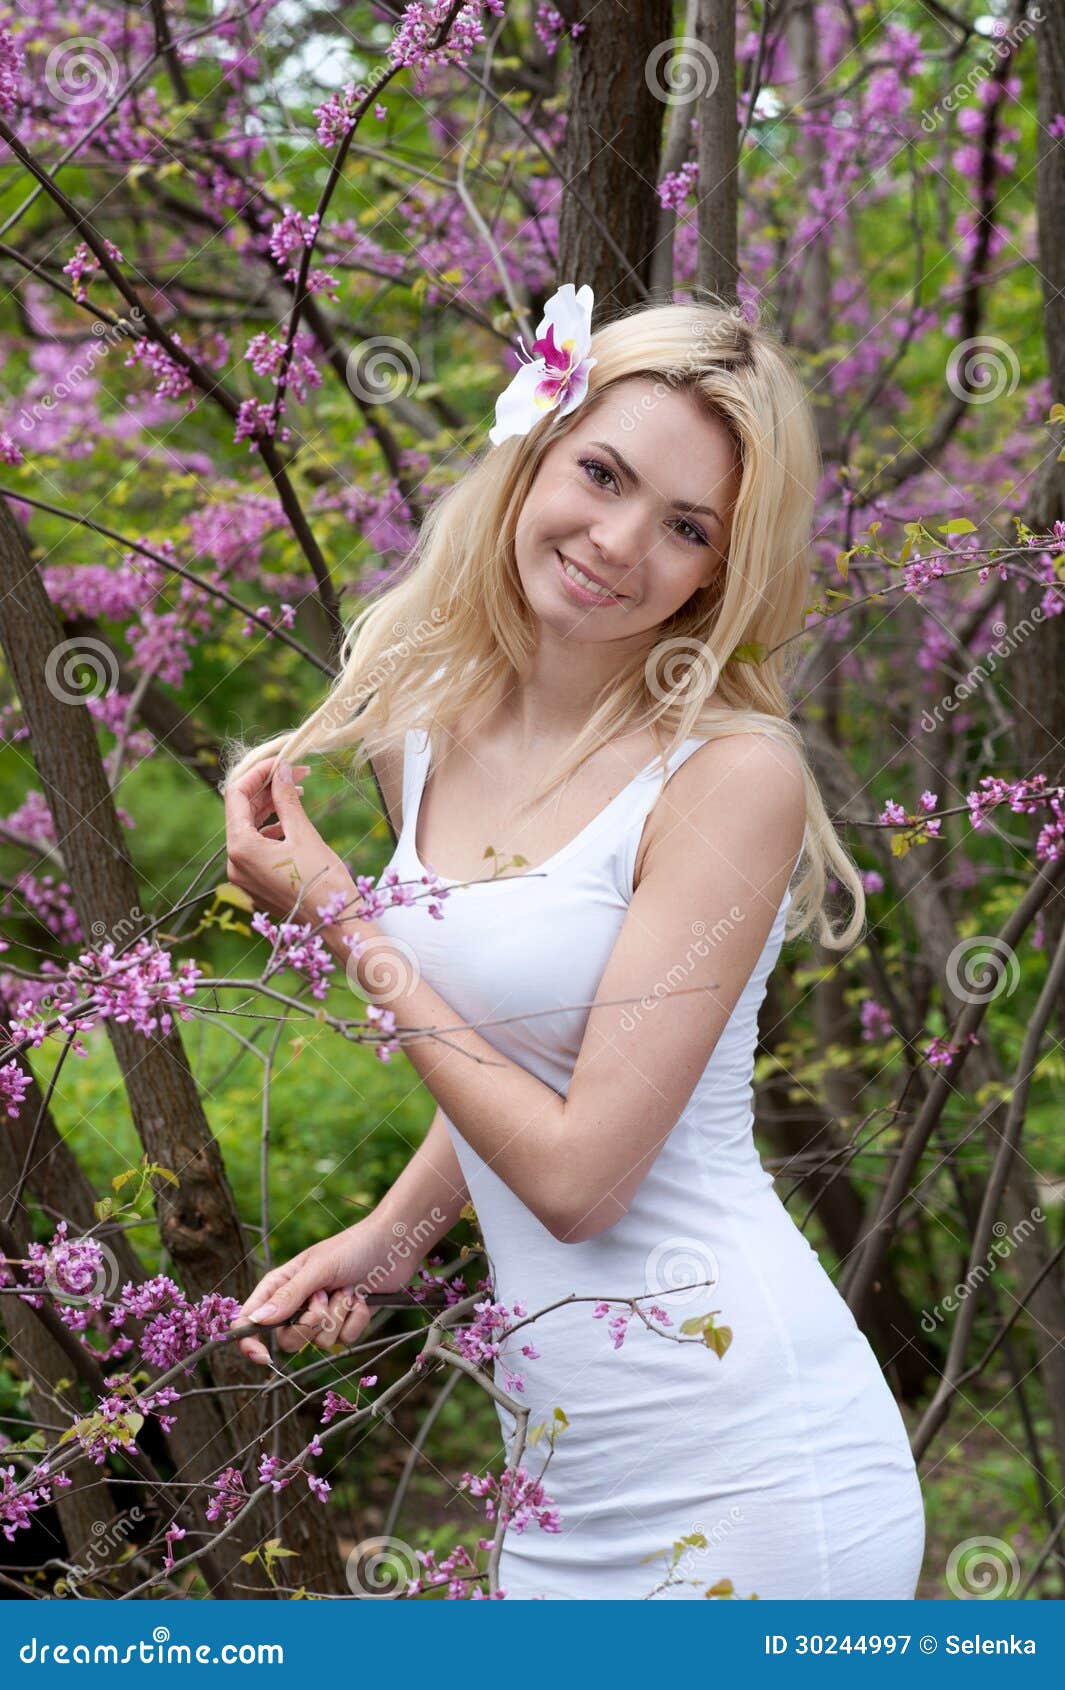 Woman in White Dress Outdoor in Park Stock Image - Image of model, face ...